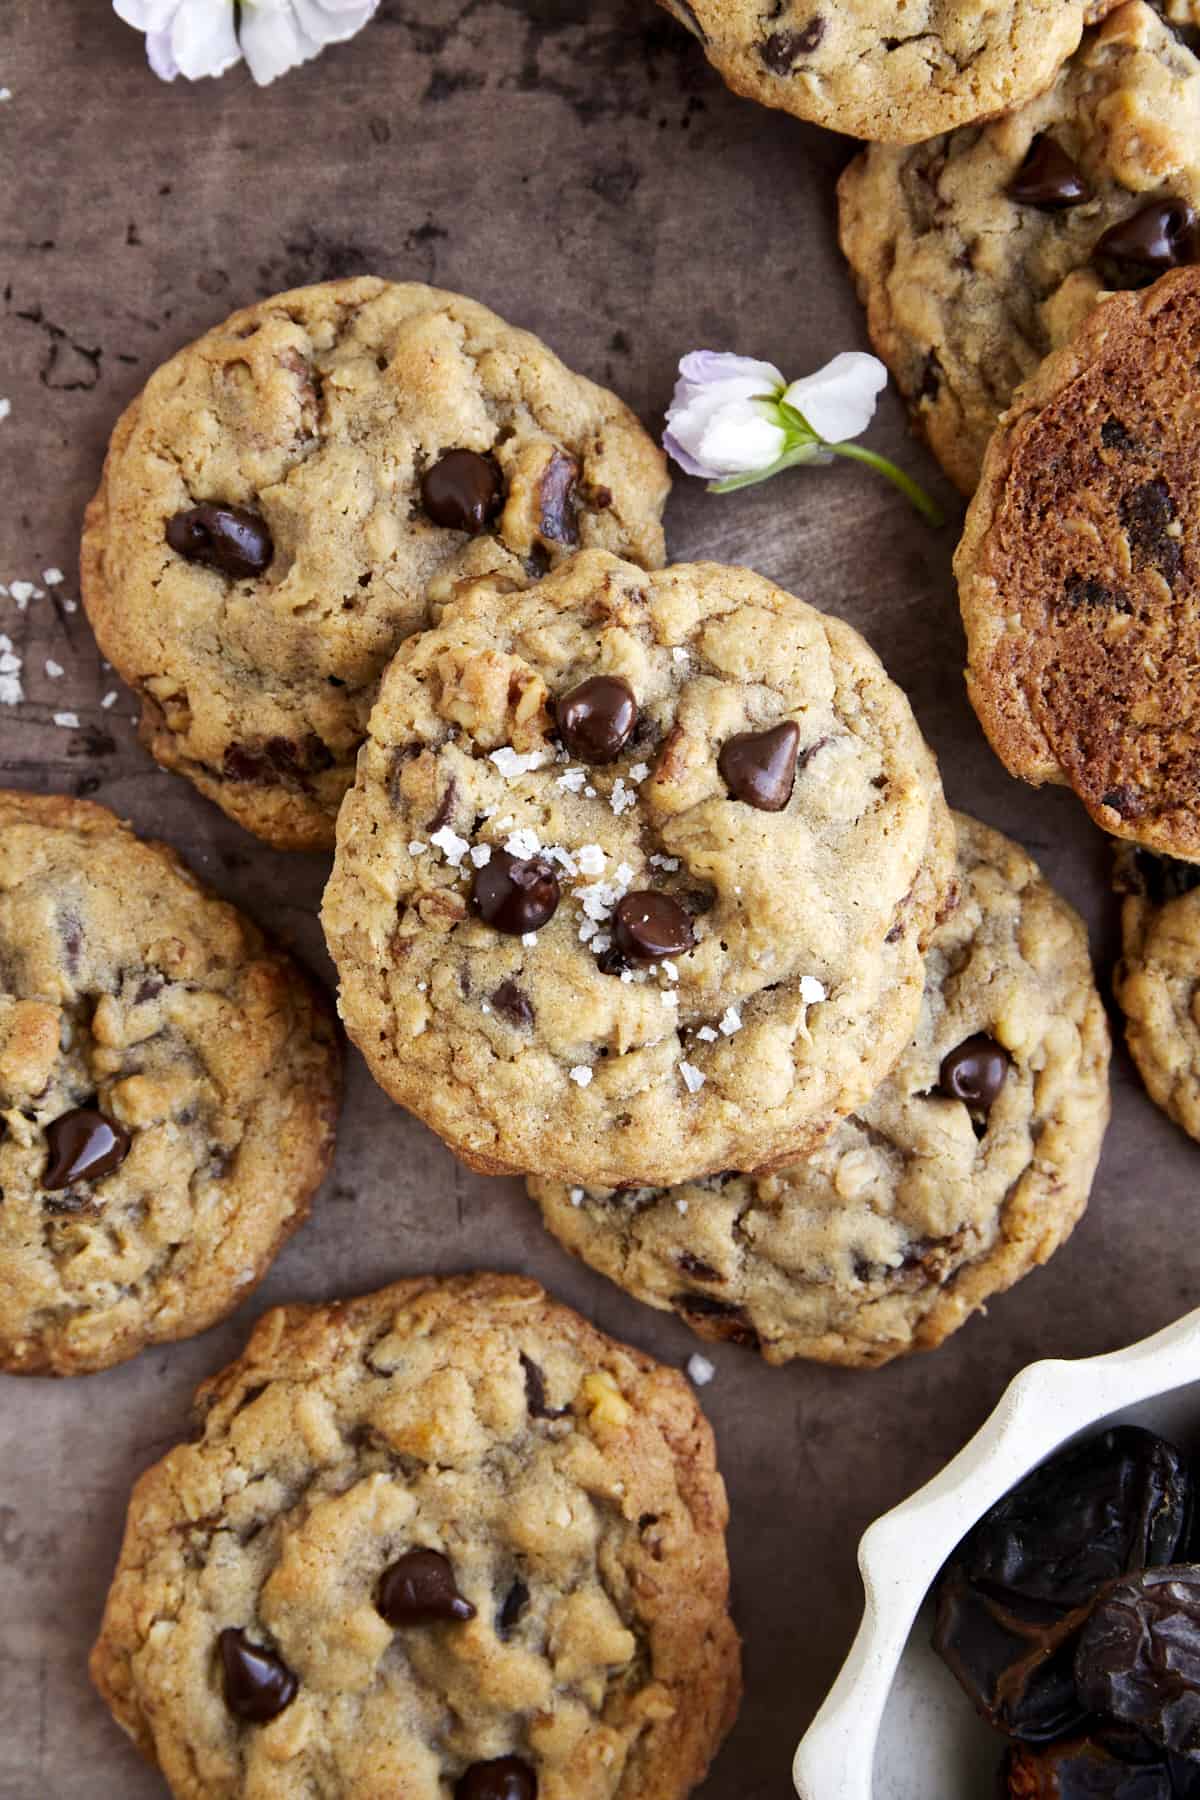 Date Cookies with Chocolate Chips and Walnuts